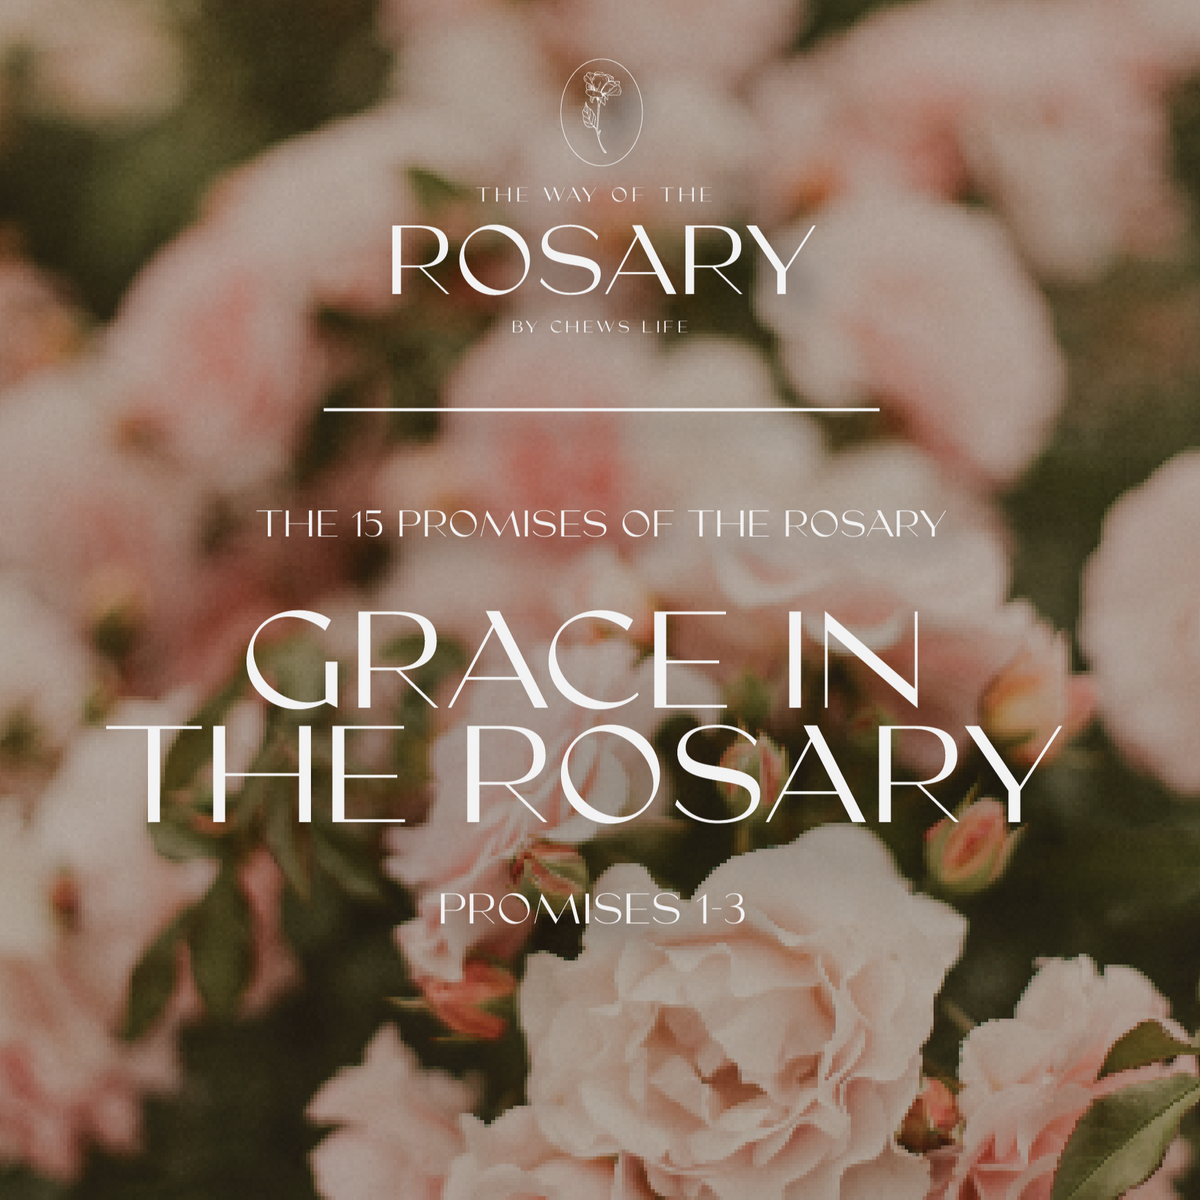 Way of The Rosary | Journal 1 | Grace in the Rosary